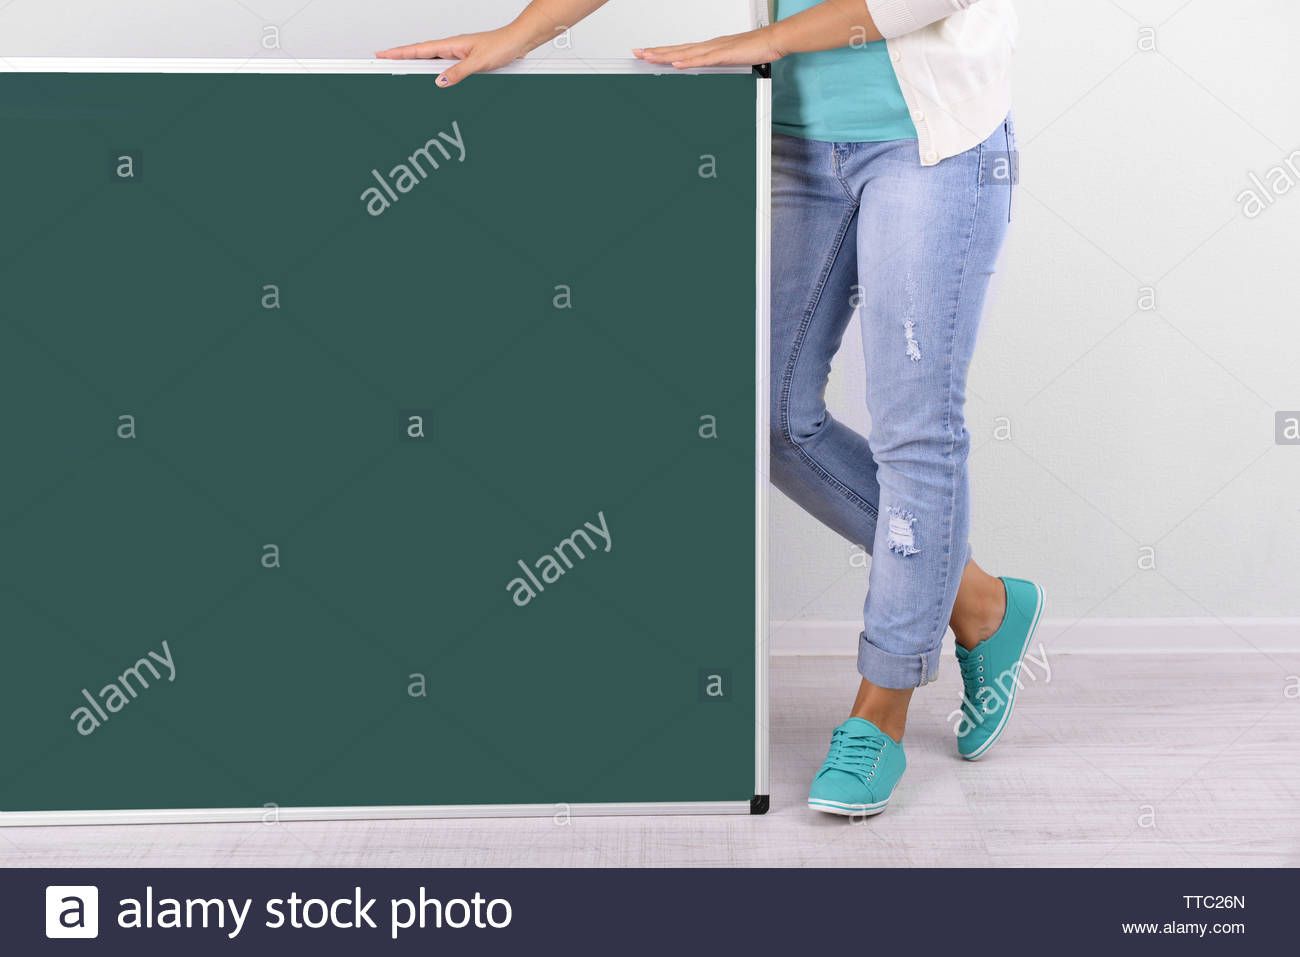 Woman In Causal With Green Blackboard On Grey Background Close Up